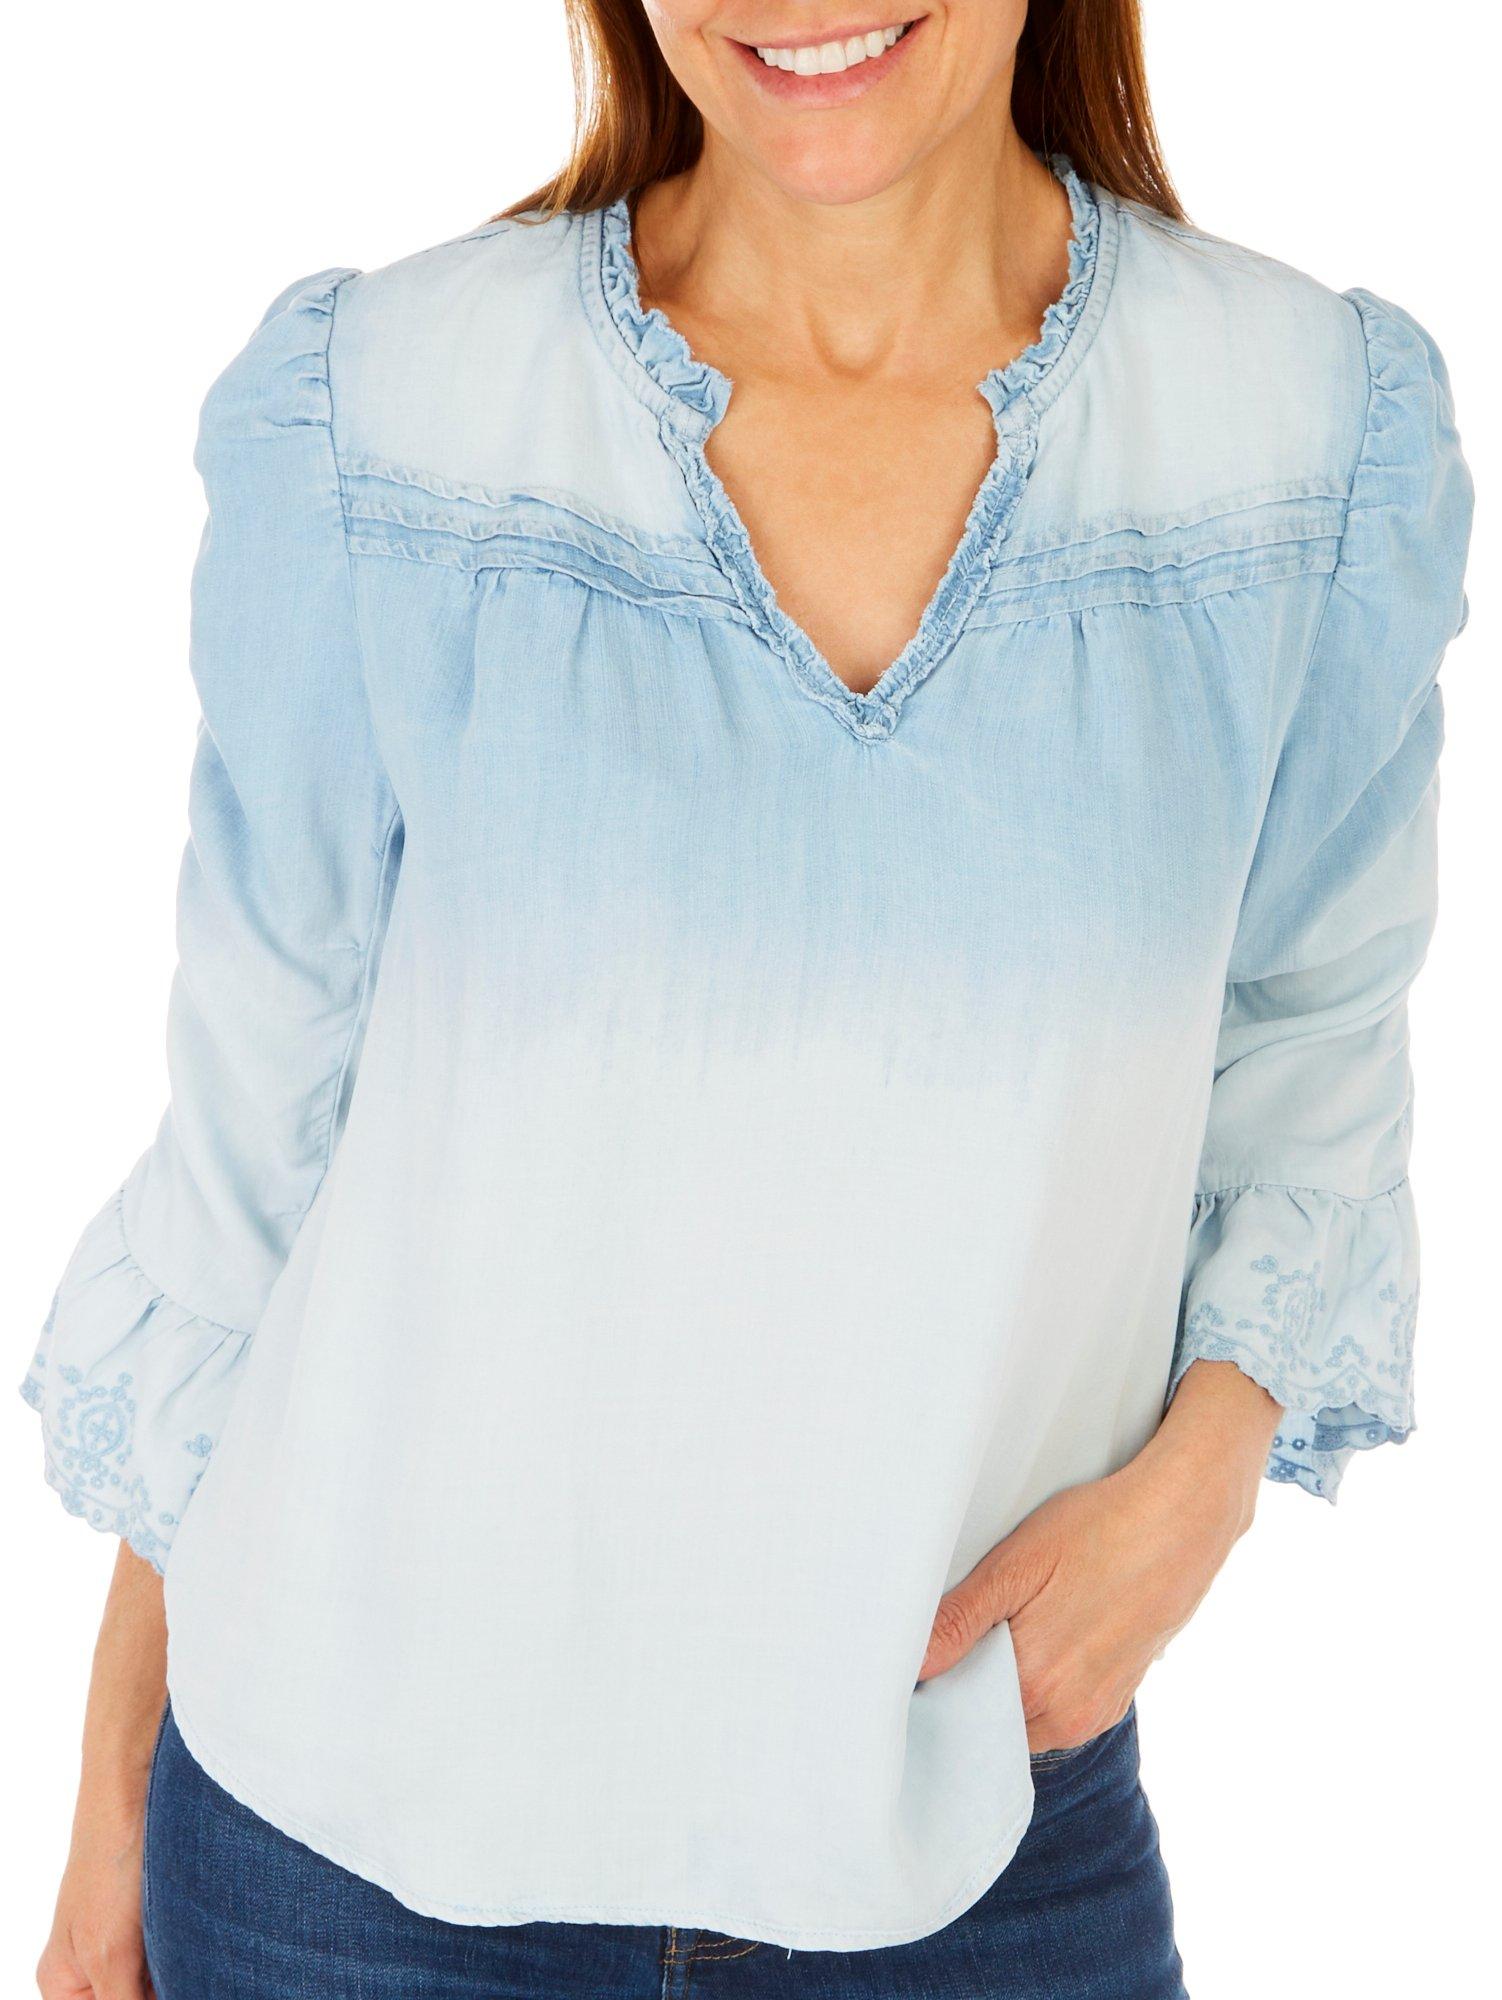 Womens Scallop Embroidered Sleeve Woven Top